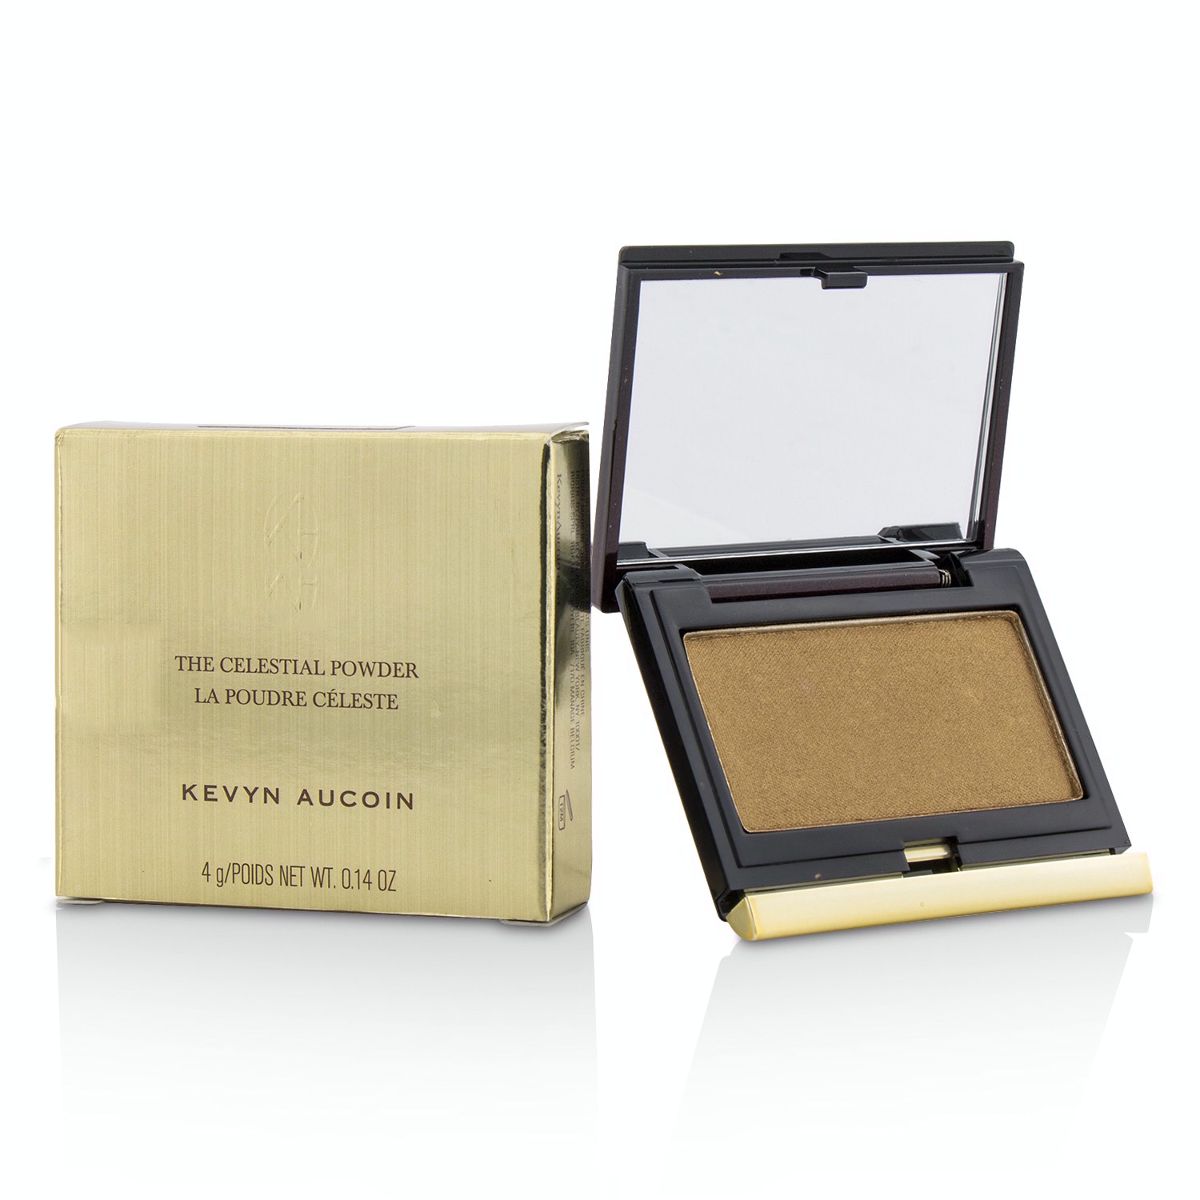 The Celestial Powder (New Packaging) - # Sunlight Kevyn Aucoin Image